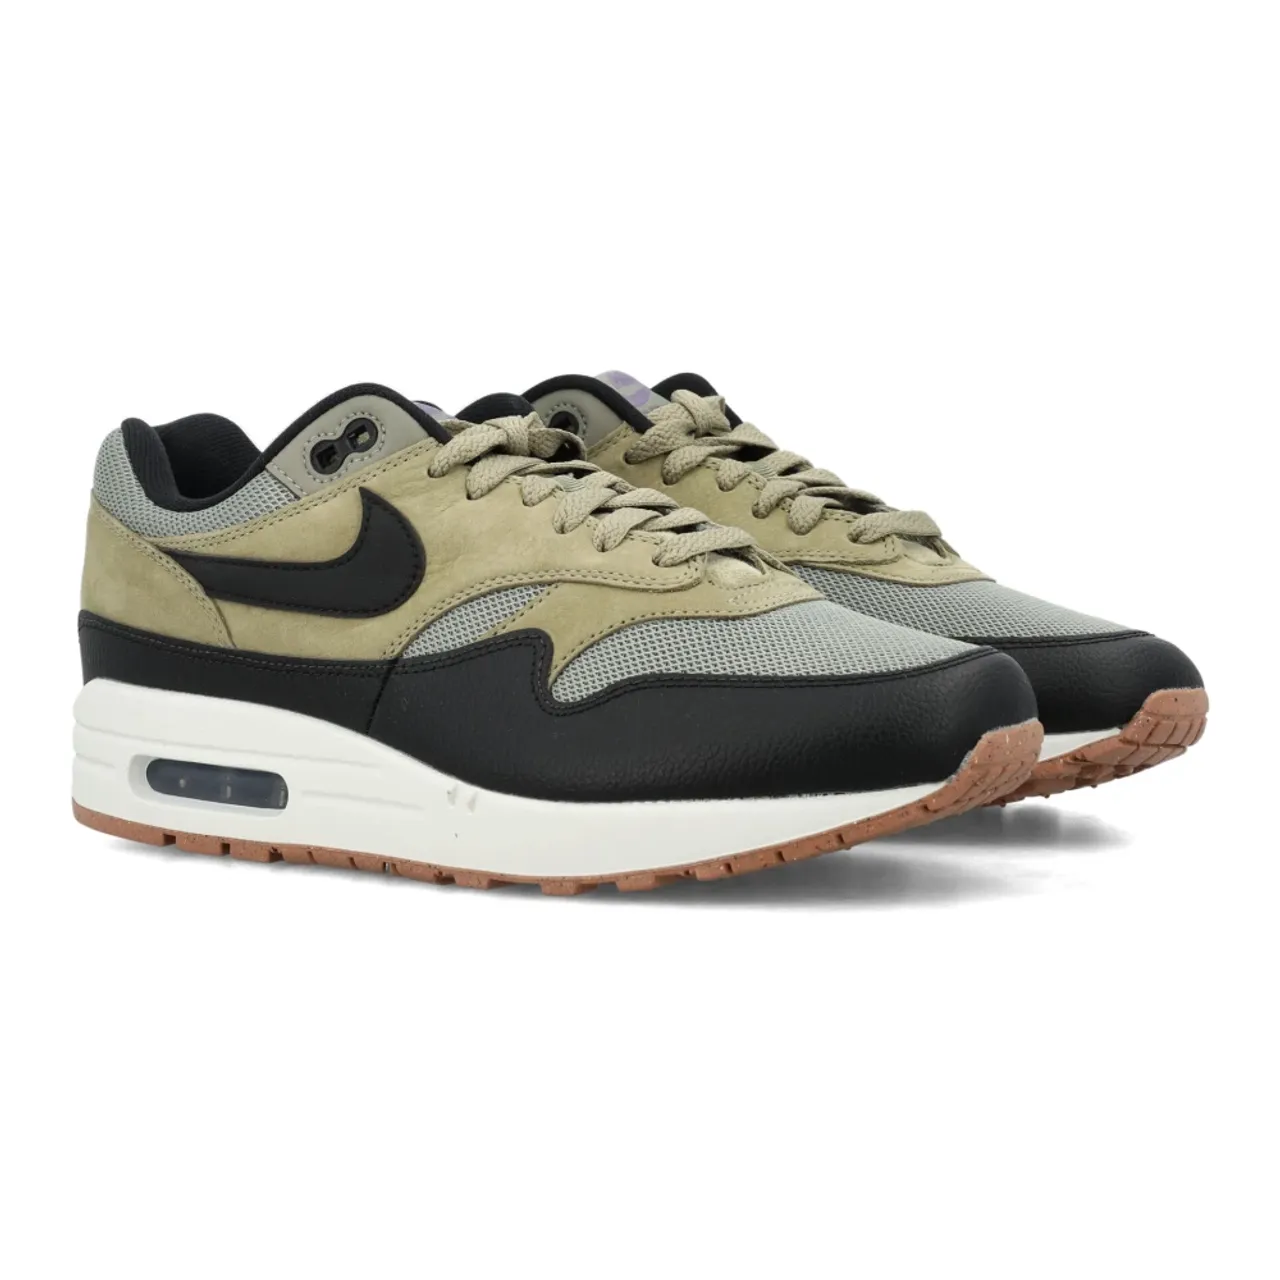 Nike , AIR MAX 1 SC Sneakers ,Multicolor male, Sizes: